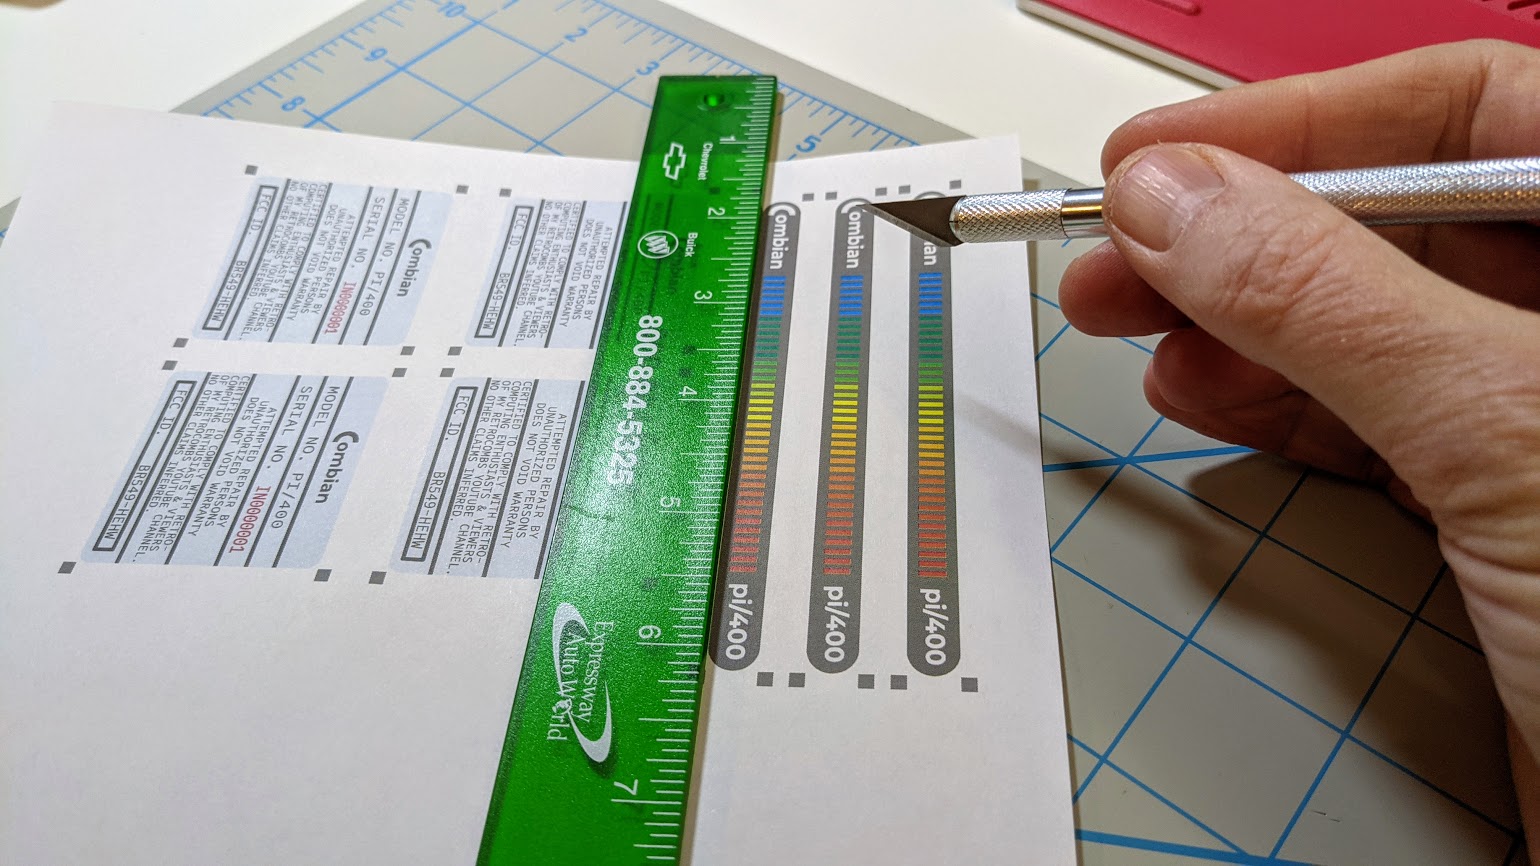 Cutting the logo and serial number prototypes